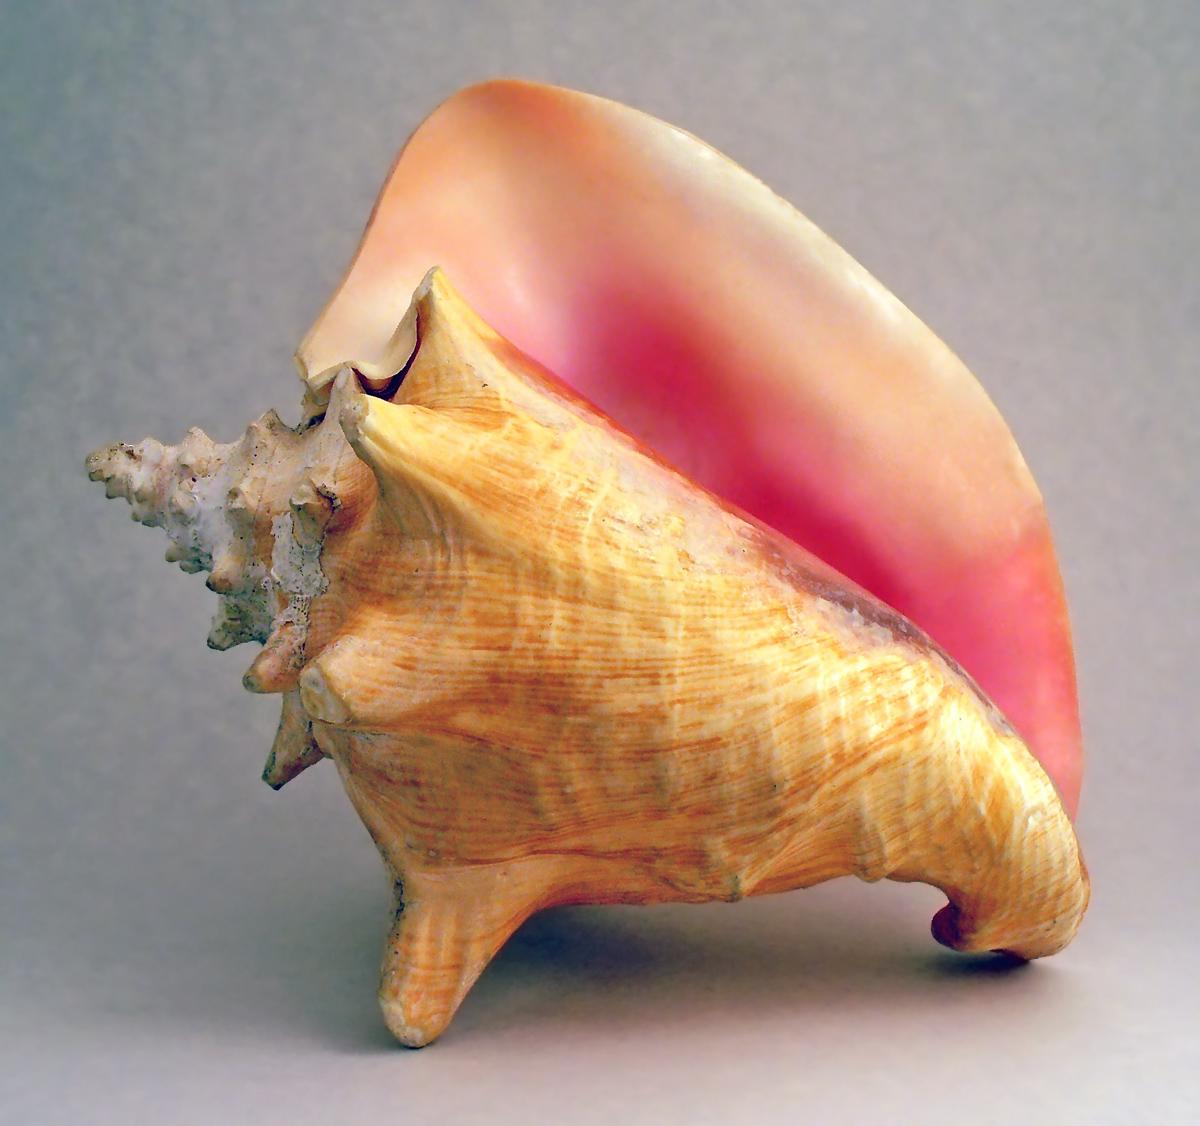 Proposing Future Research Directions for Conch Shell Studies